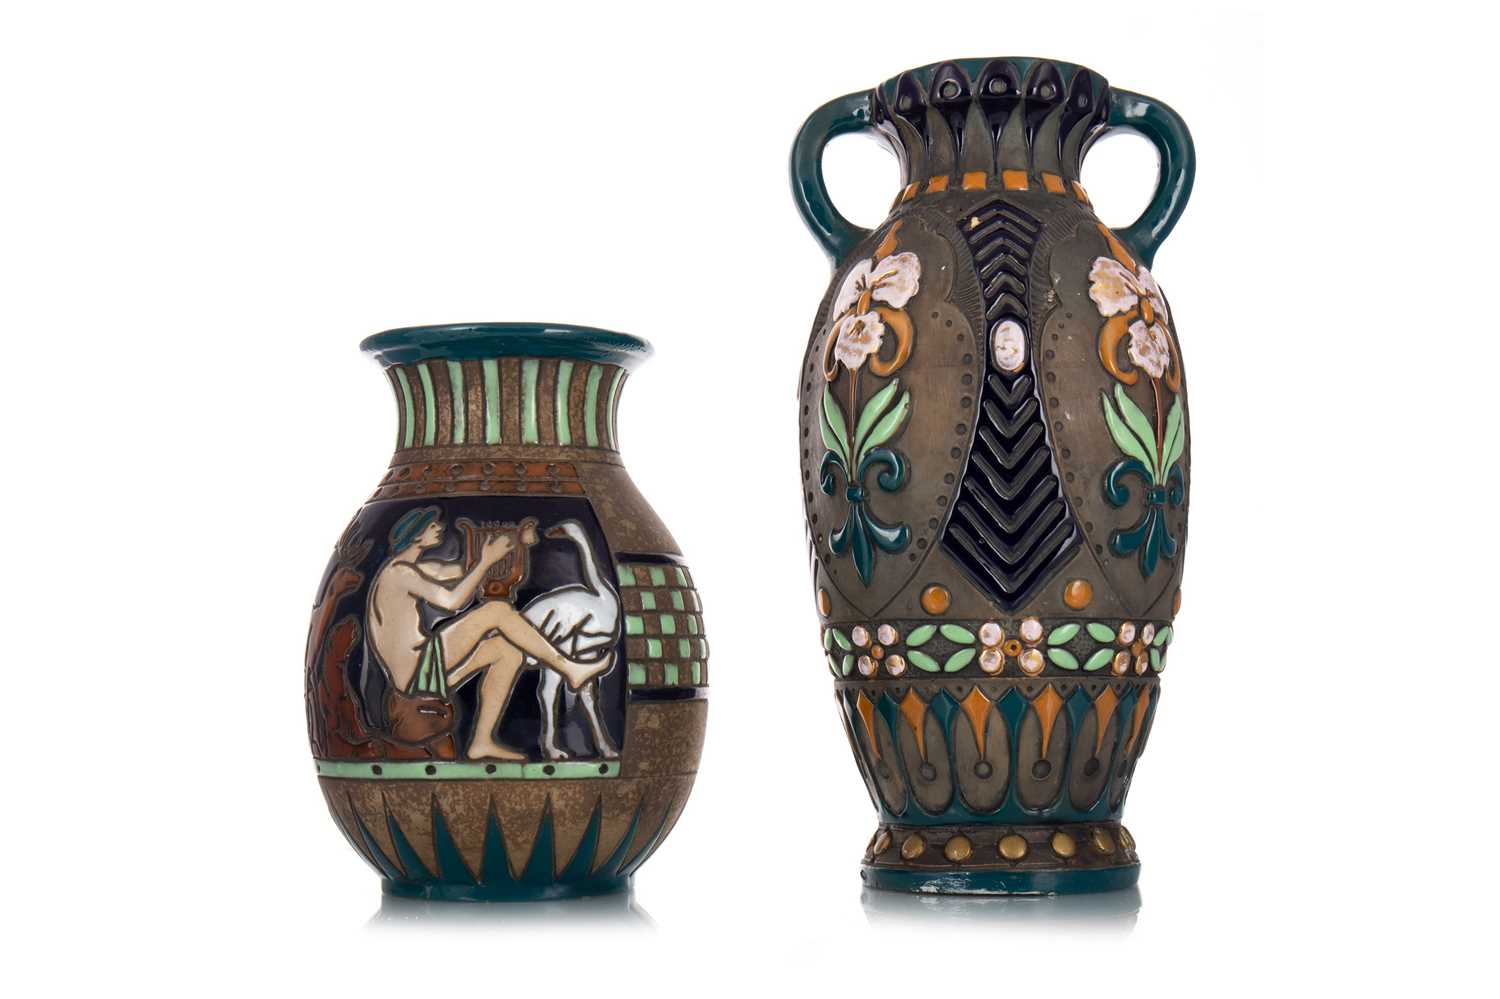 Lot 326 - AMPHORA POTTERY, TWO VASES